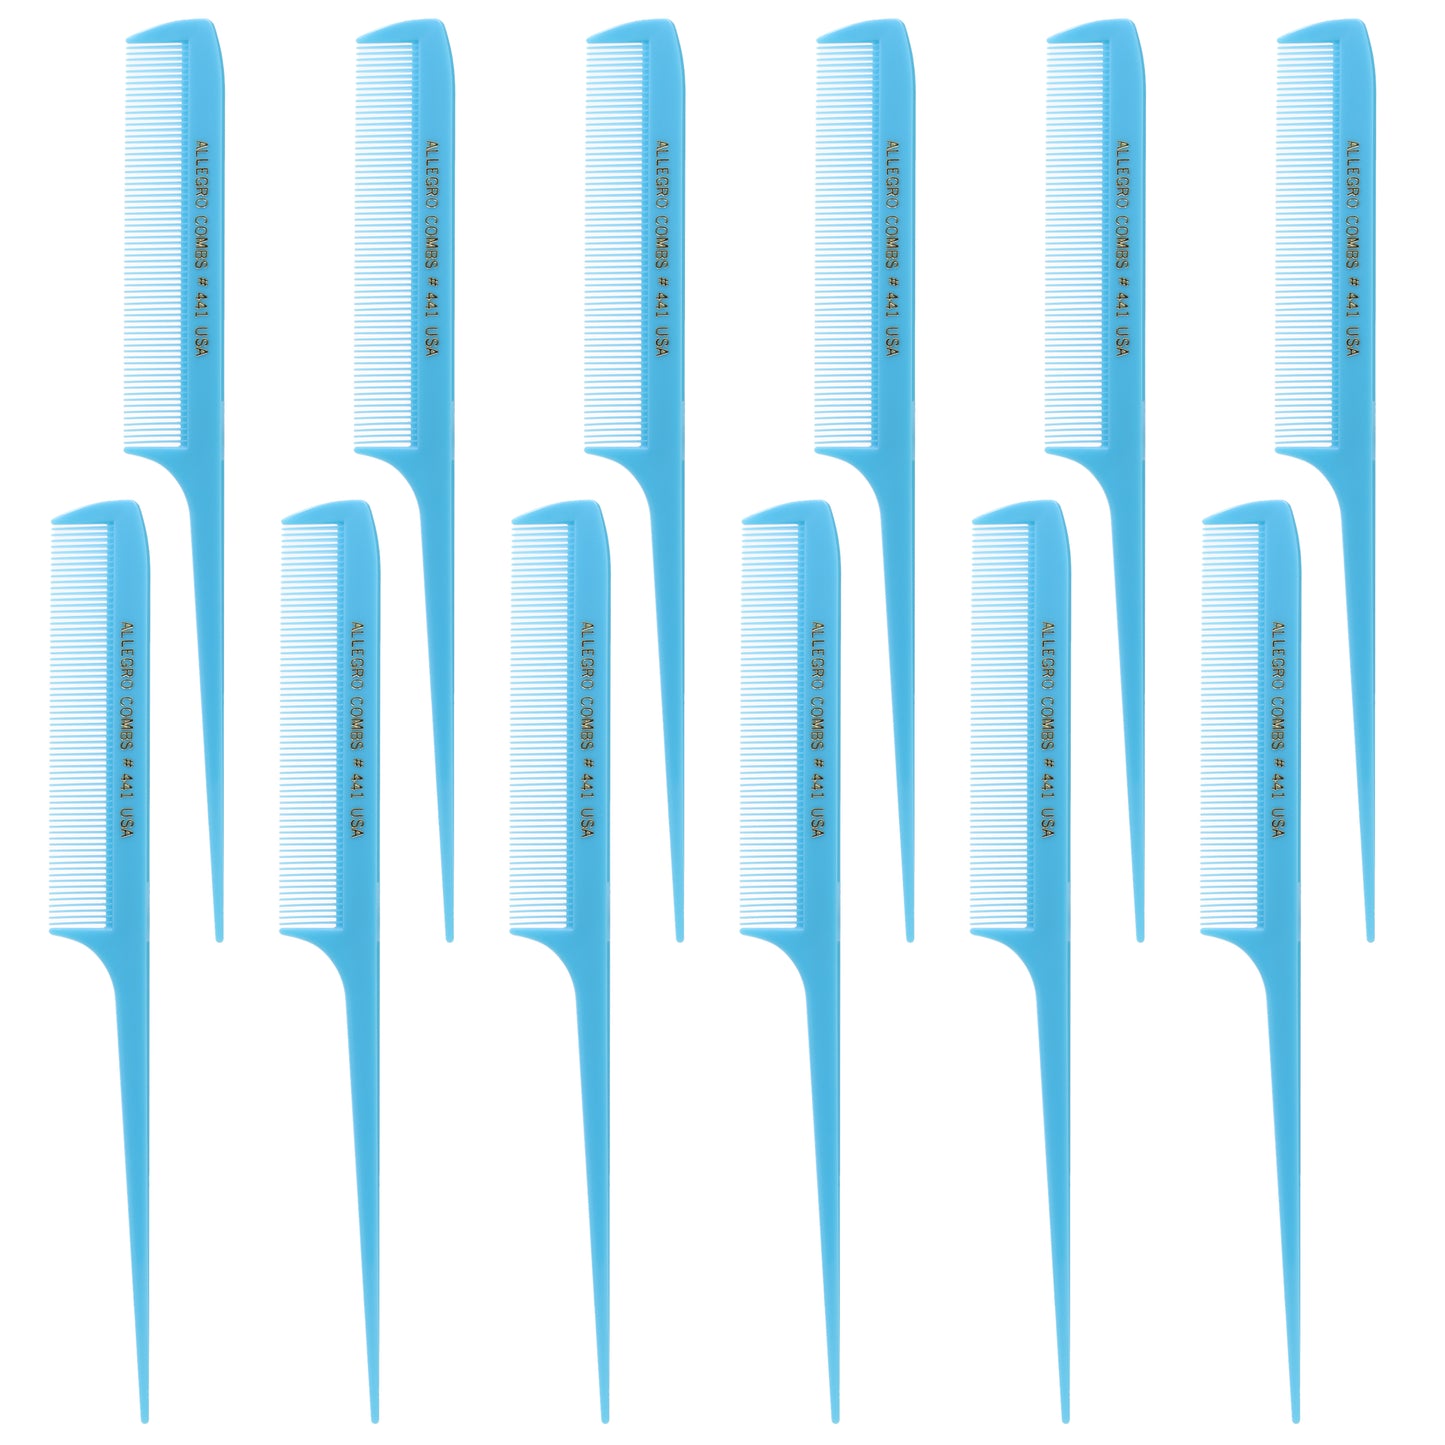 Allegro Combs 441. 8.5 In. Rat Tail Combs Braiding Or Parting Fine Teeth Rattail Hair Picks Combs Set For Hair Styling USA. 1 Dz.